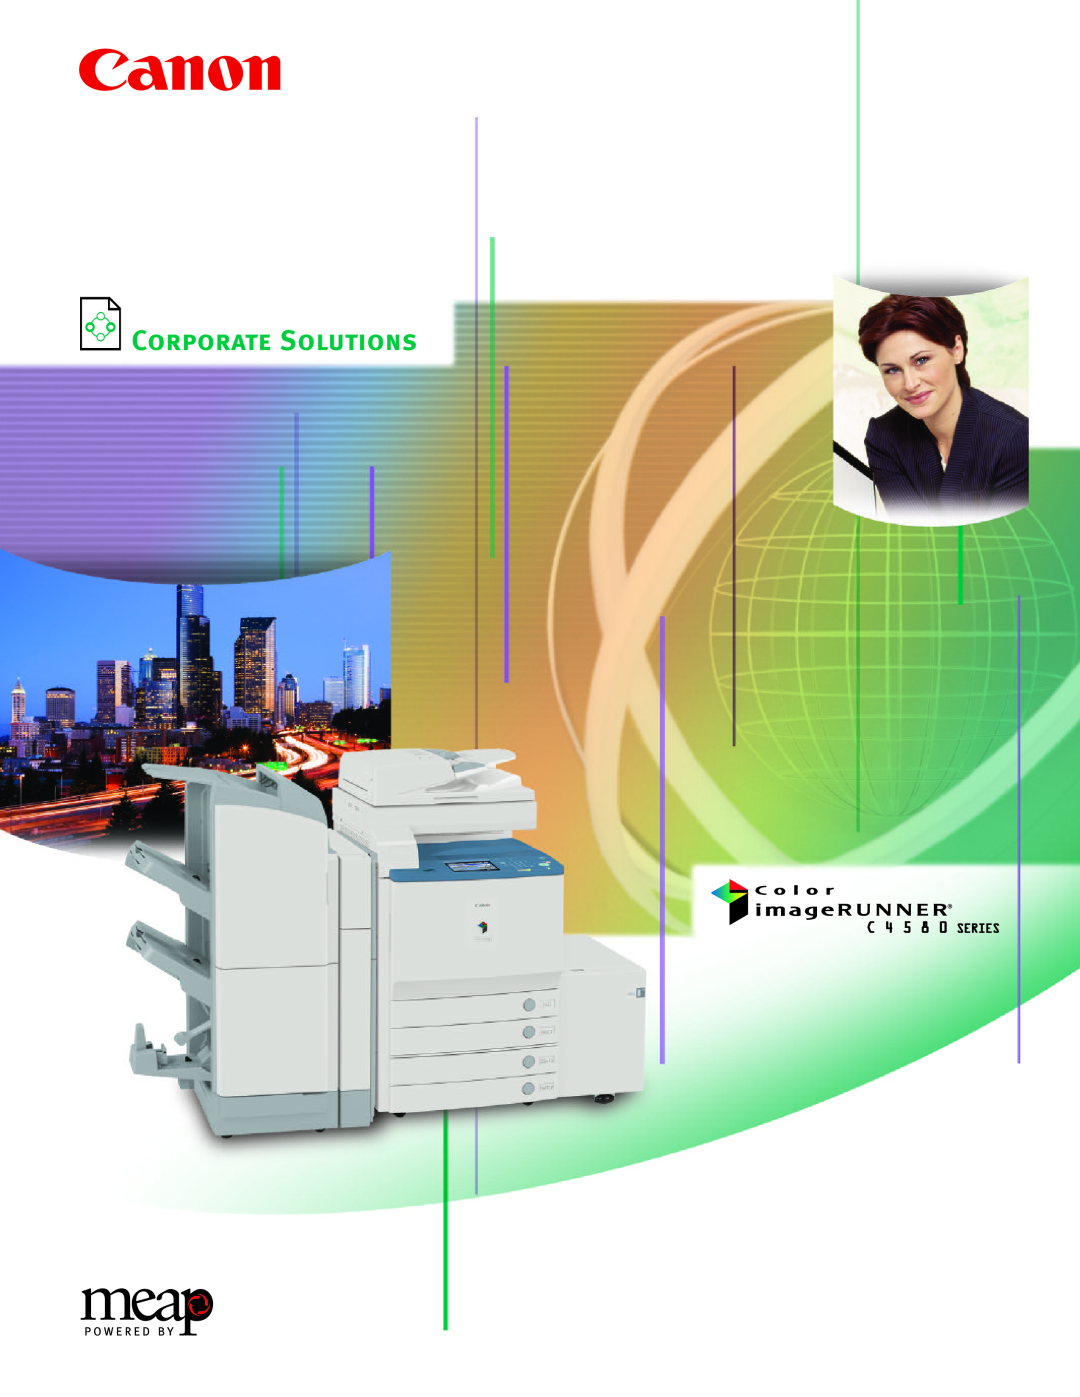 Canon C4580 Series manual Corporate Solutions 